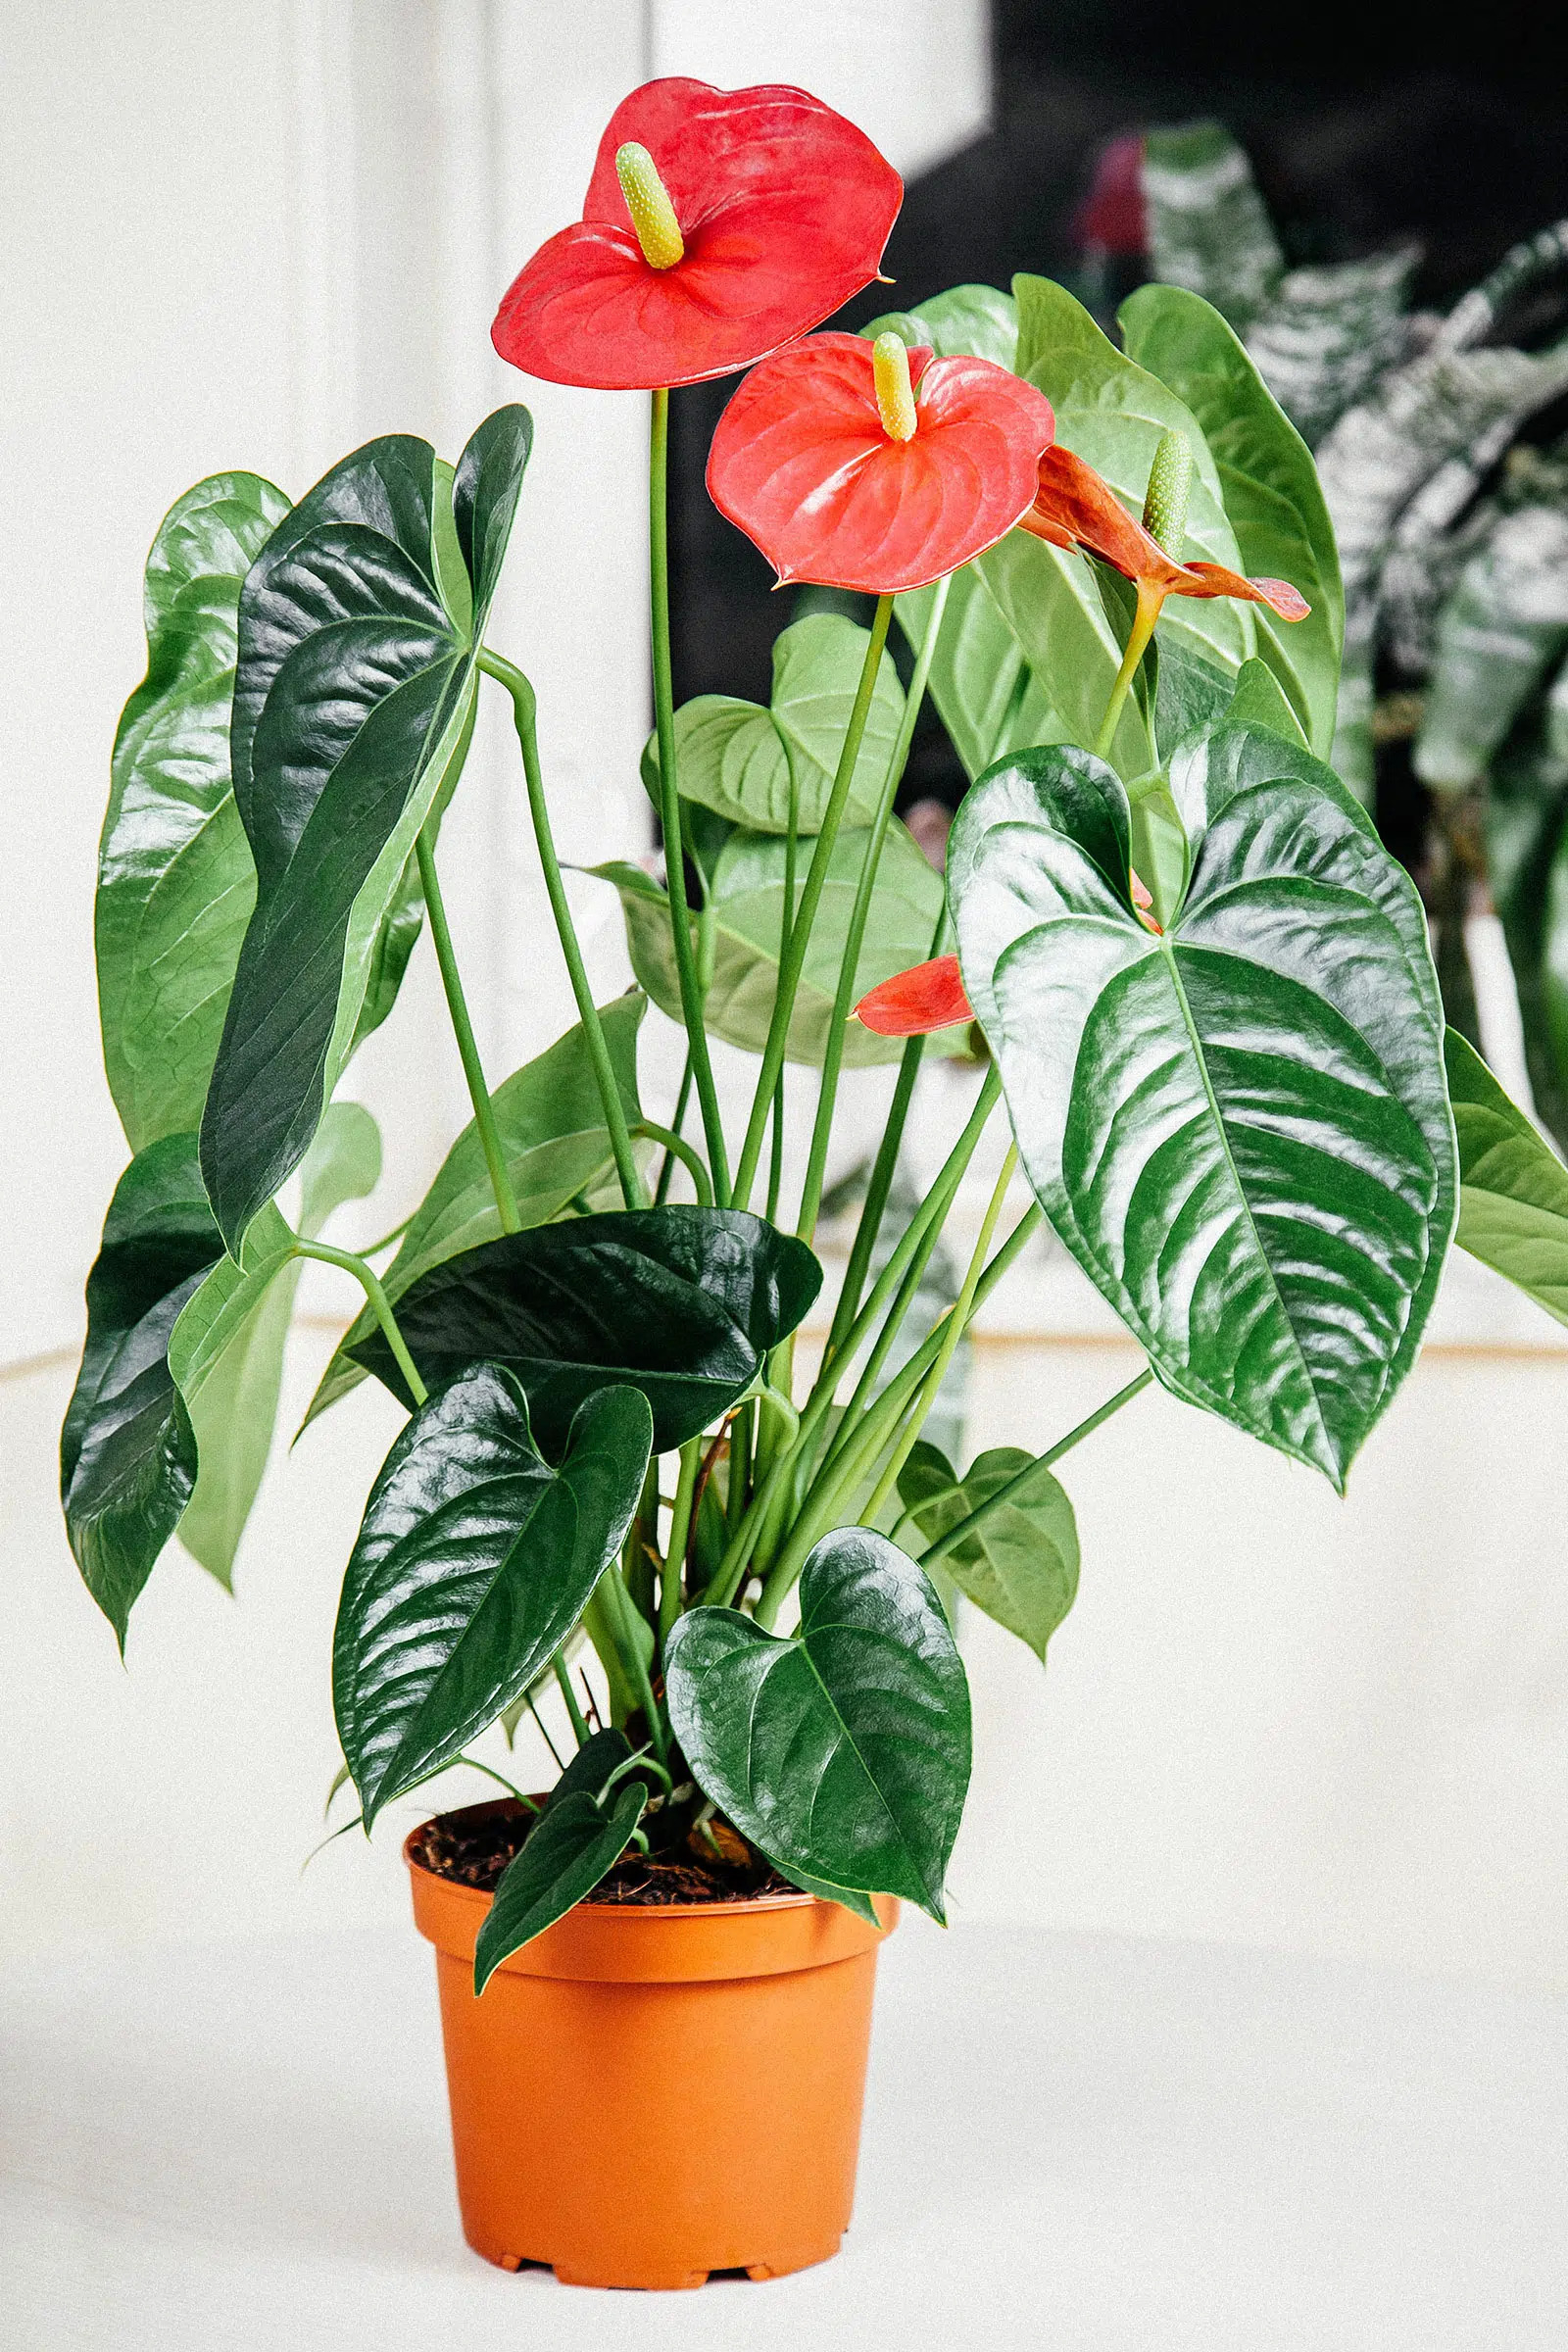 Anthurium Care: Complete Guide To Caring For Flamingo Flower